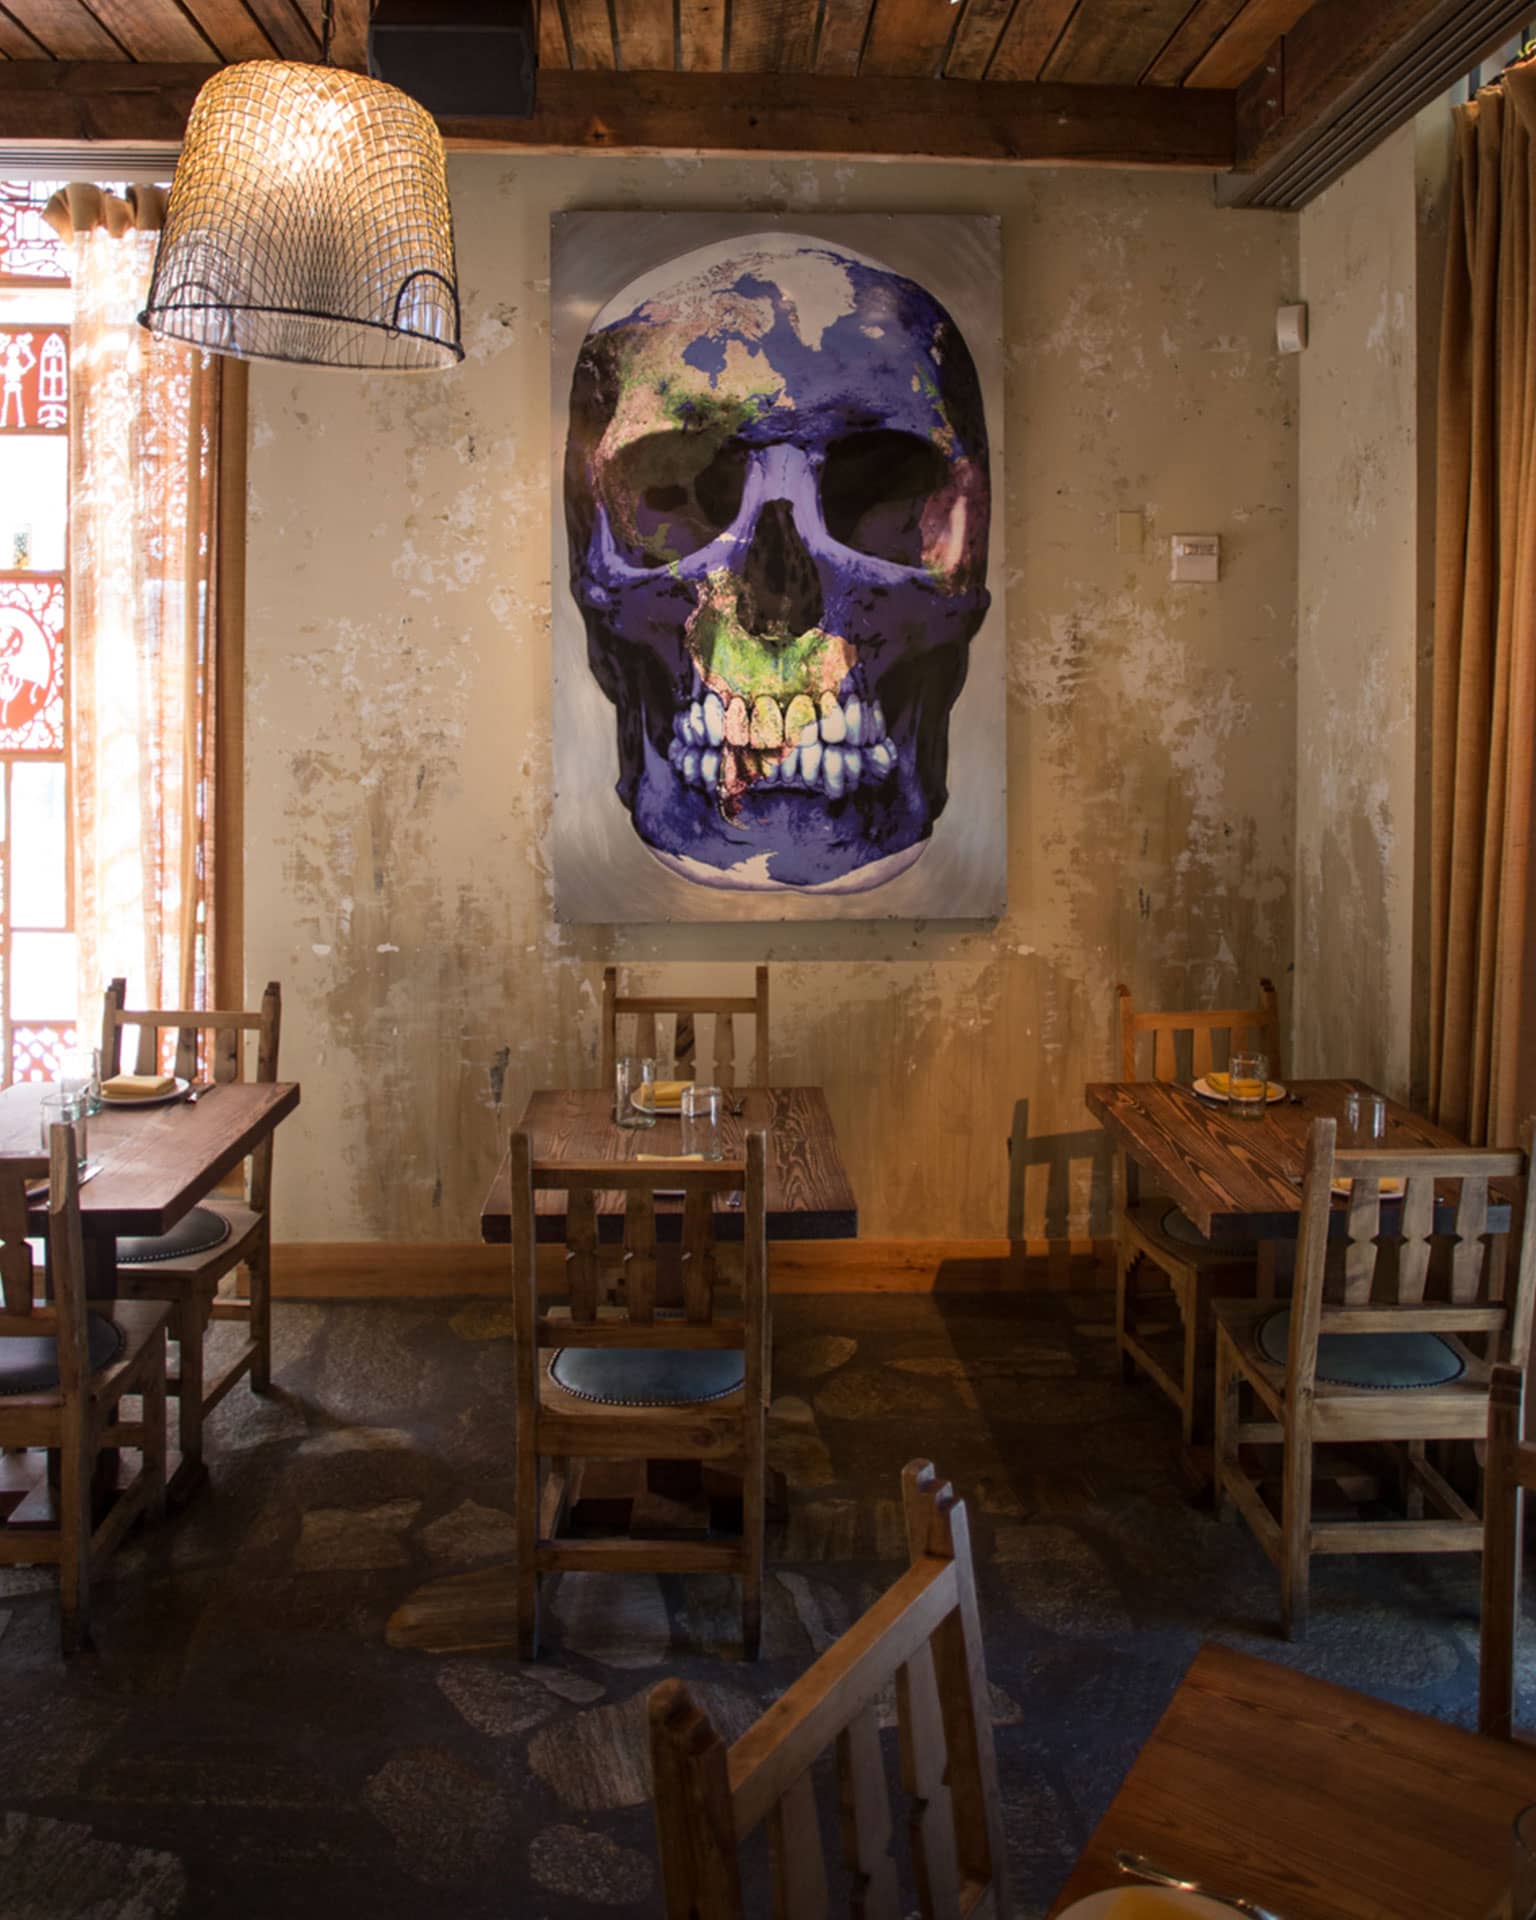 Dining room and decor, including a painting of a skeleton